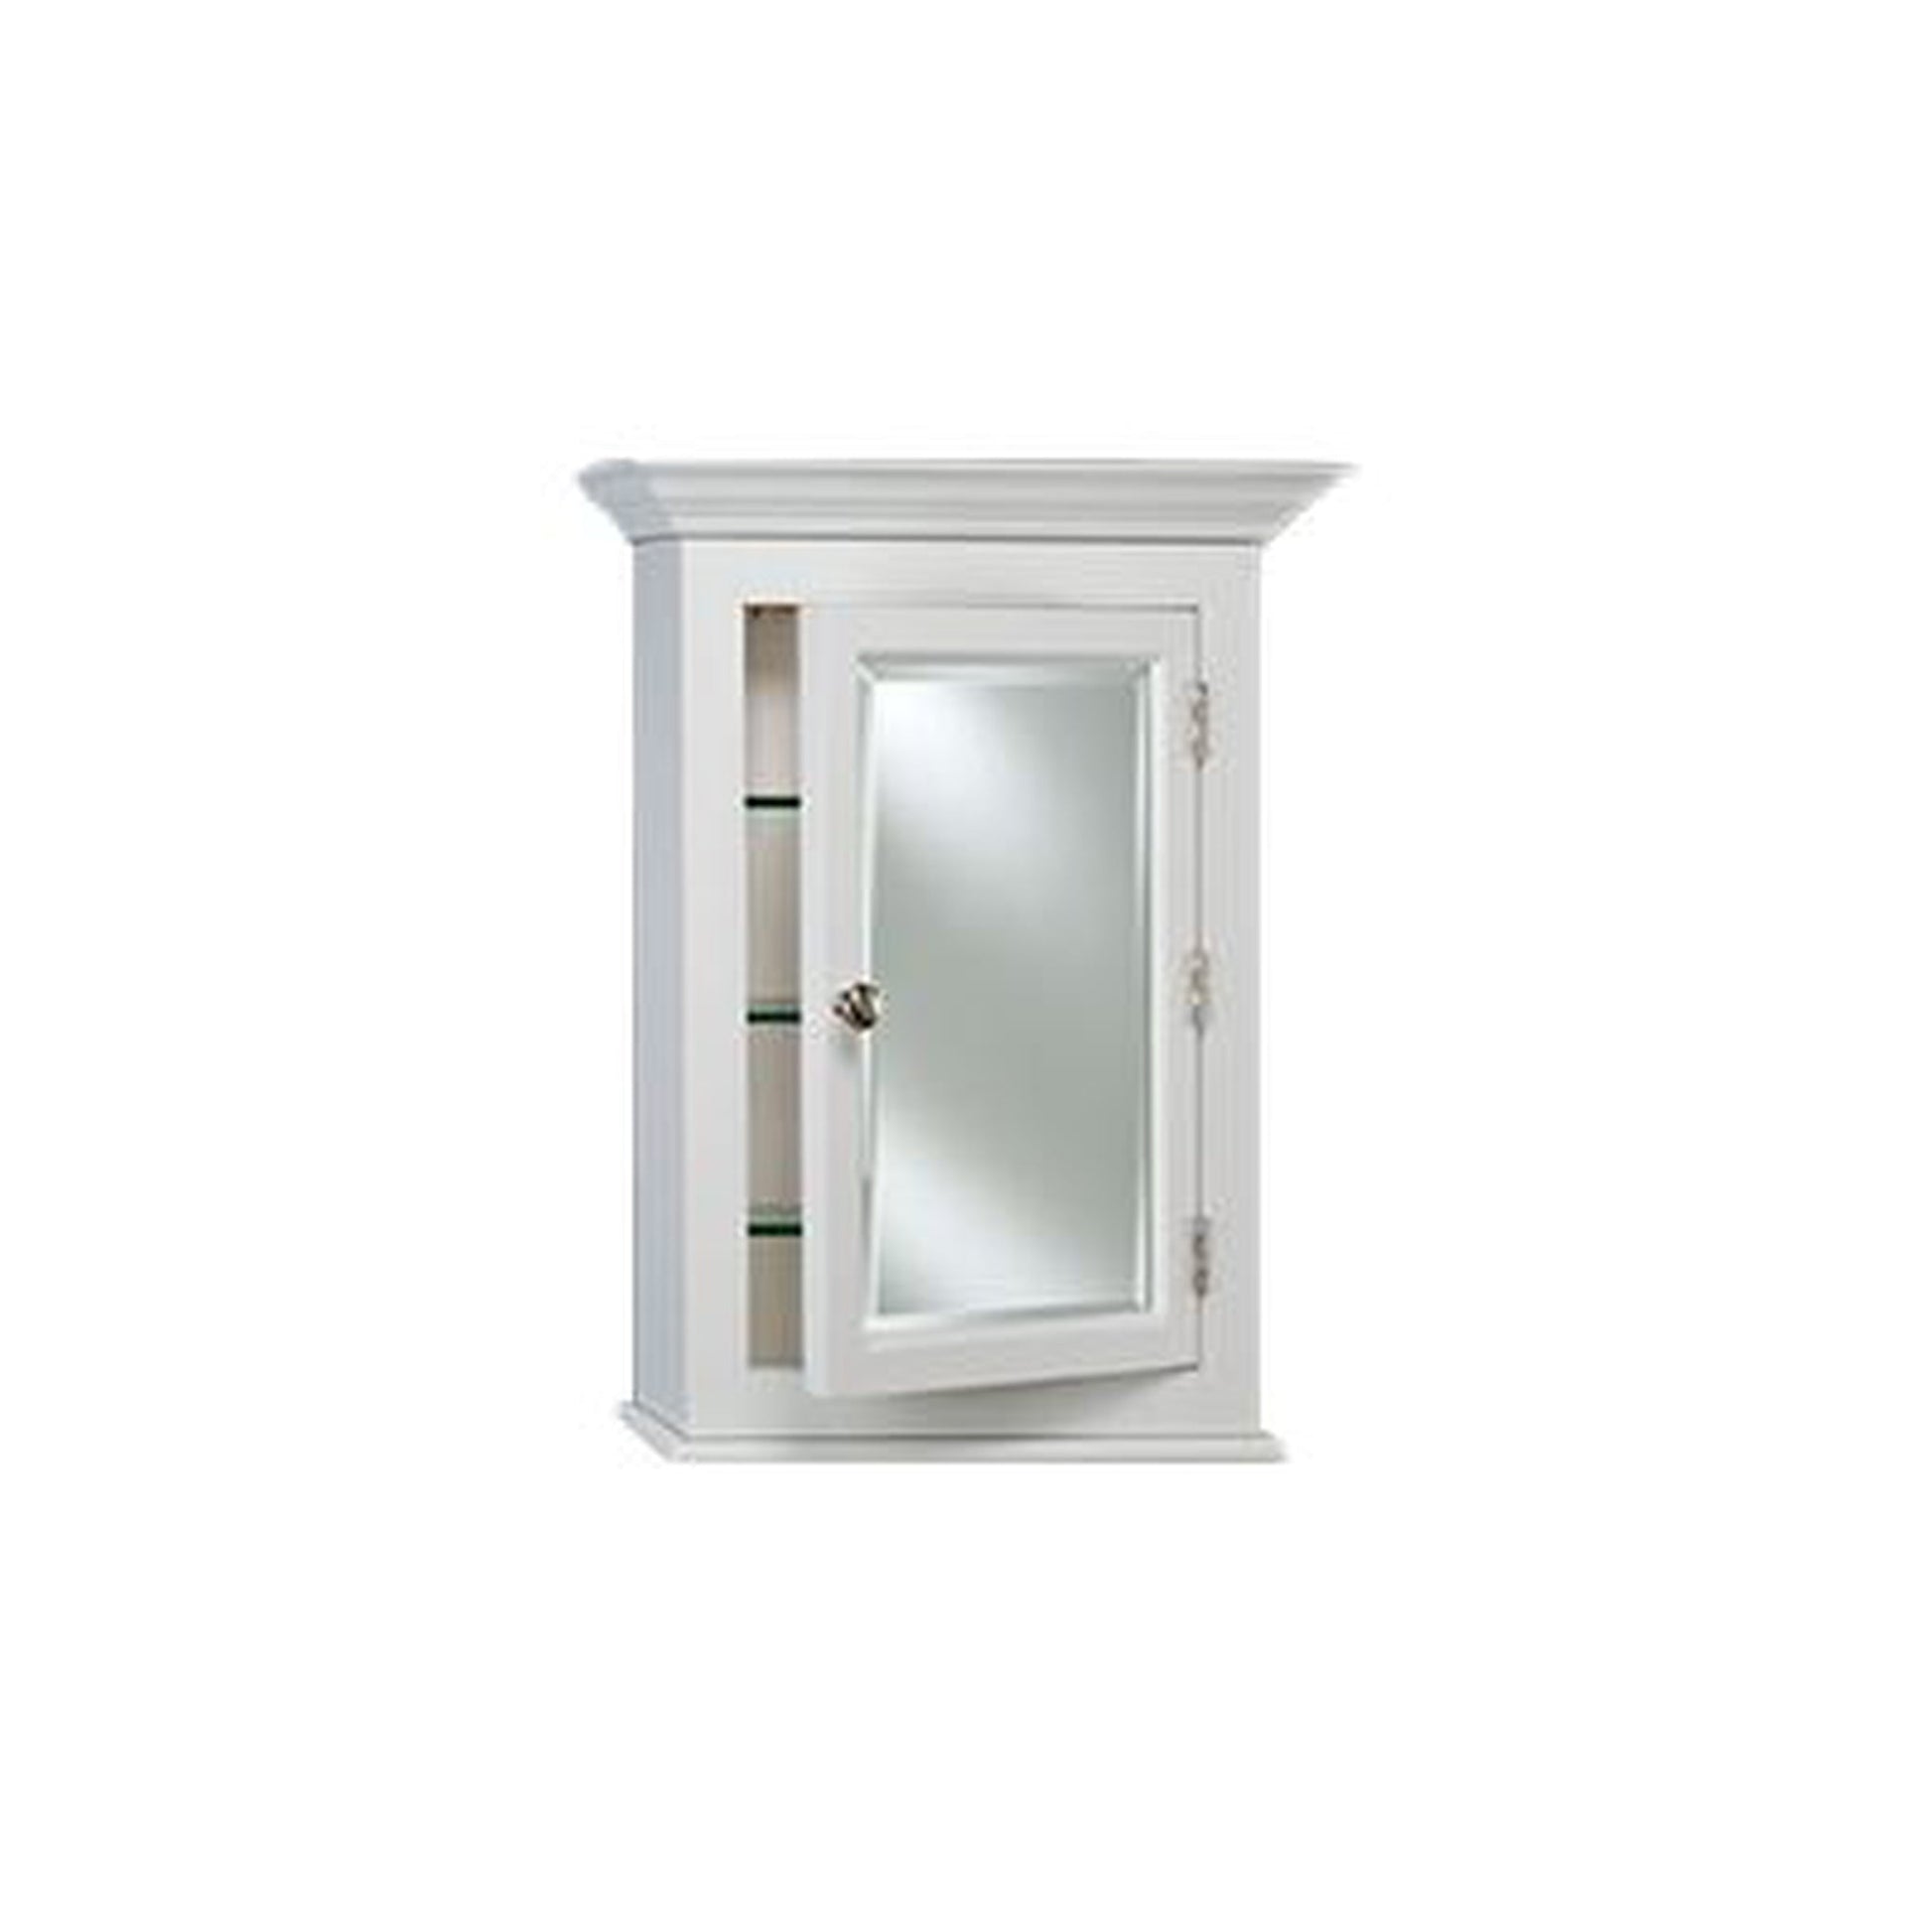 Afina Wilshire I Small White Surface Mount Right Hinged Single Door  Medicine Cabinet With Beveled Edge Mirror